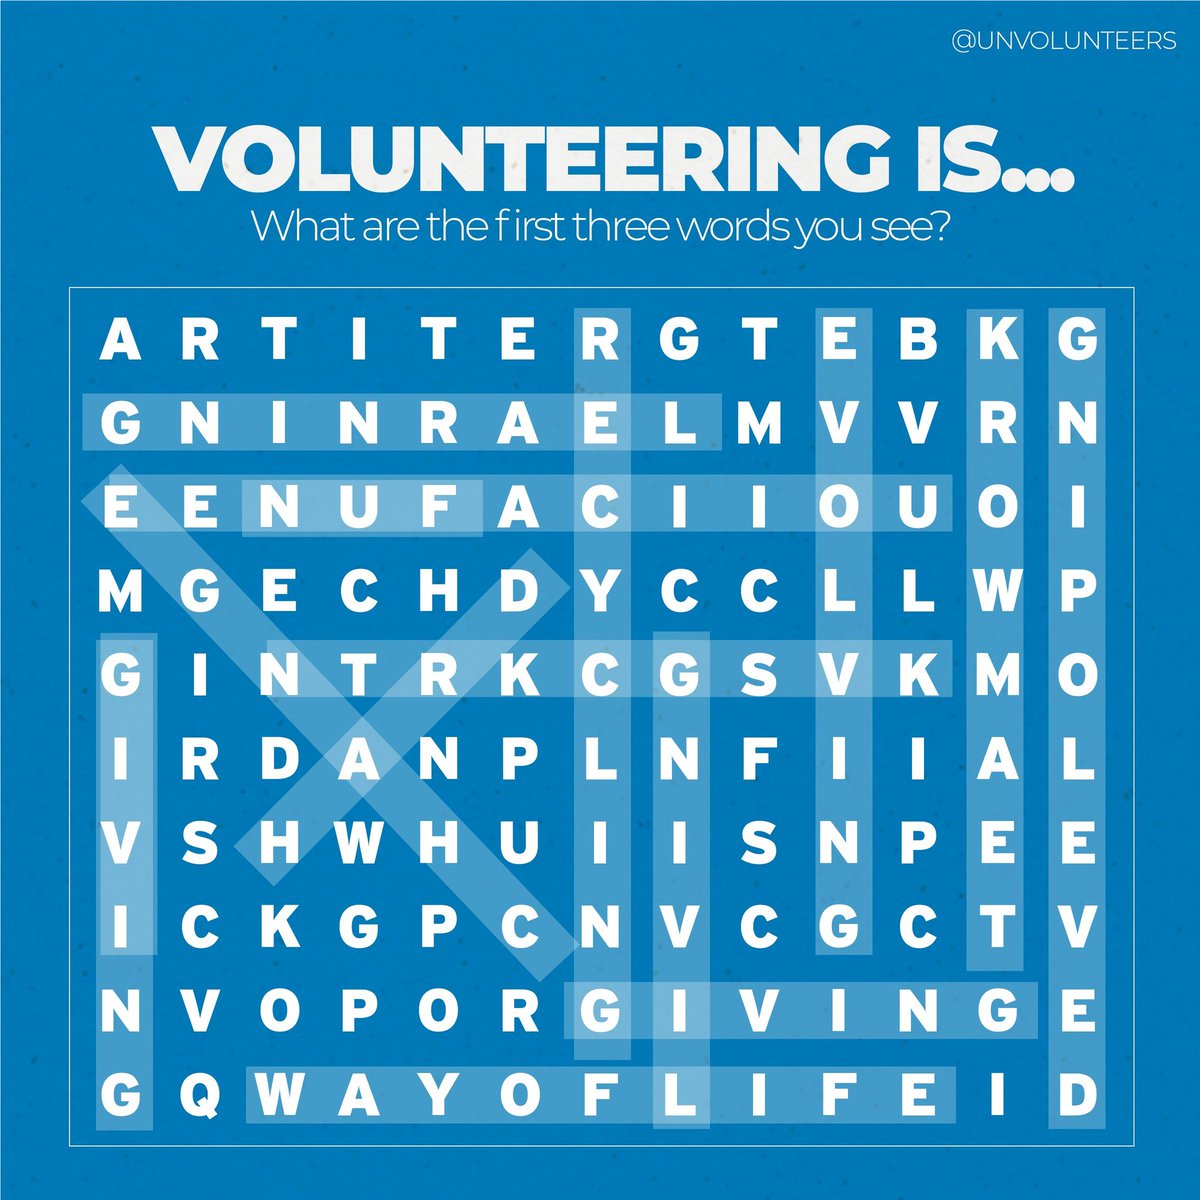 How many words did you find in our trivia? Volunteering is... change, developing, teamwork, way of life, giving, learning, hard, ...and so much more